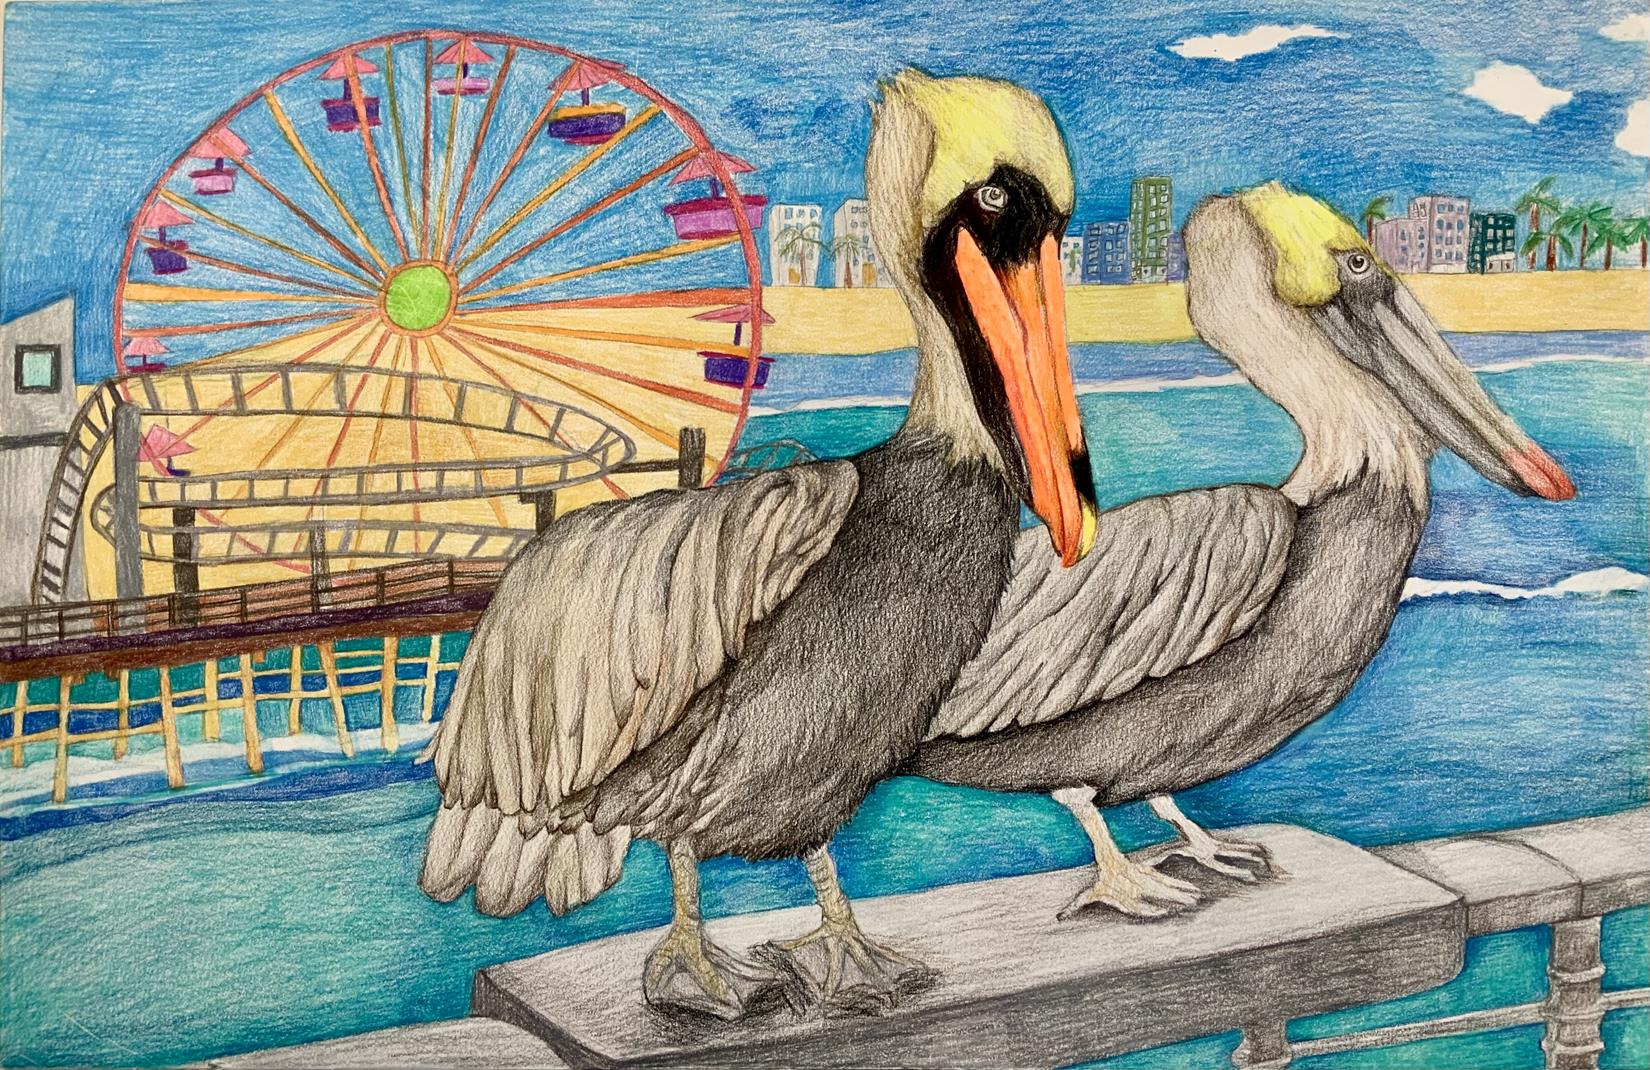 two pelicans stand on the railing of the pier with the boardwalk and ferris wheel behind them